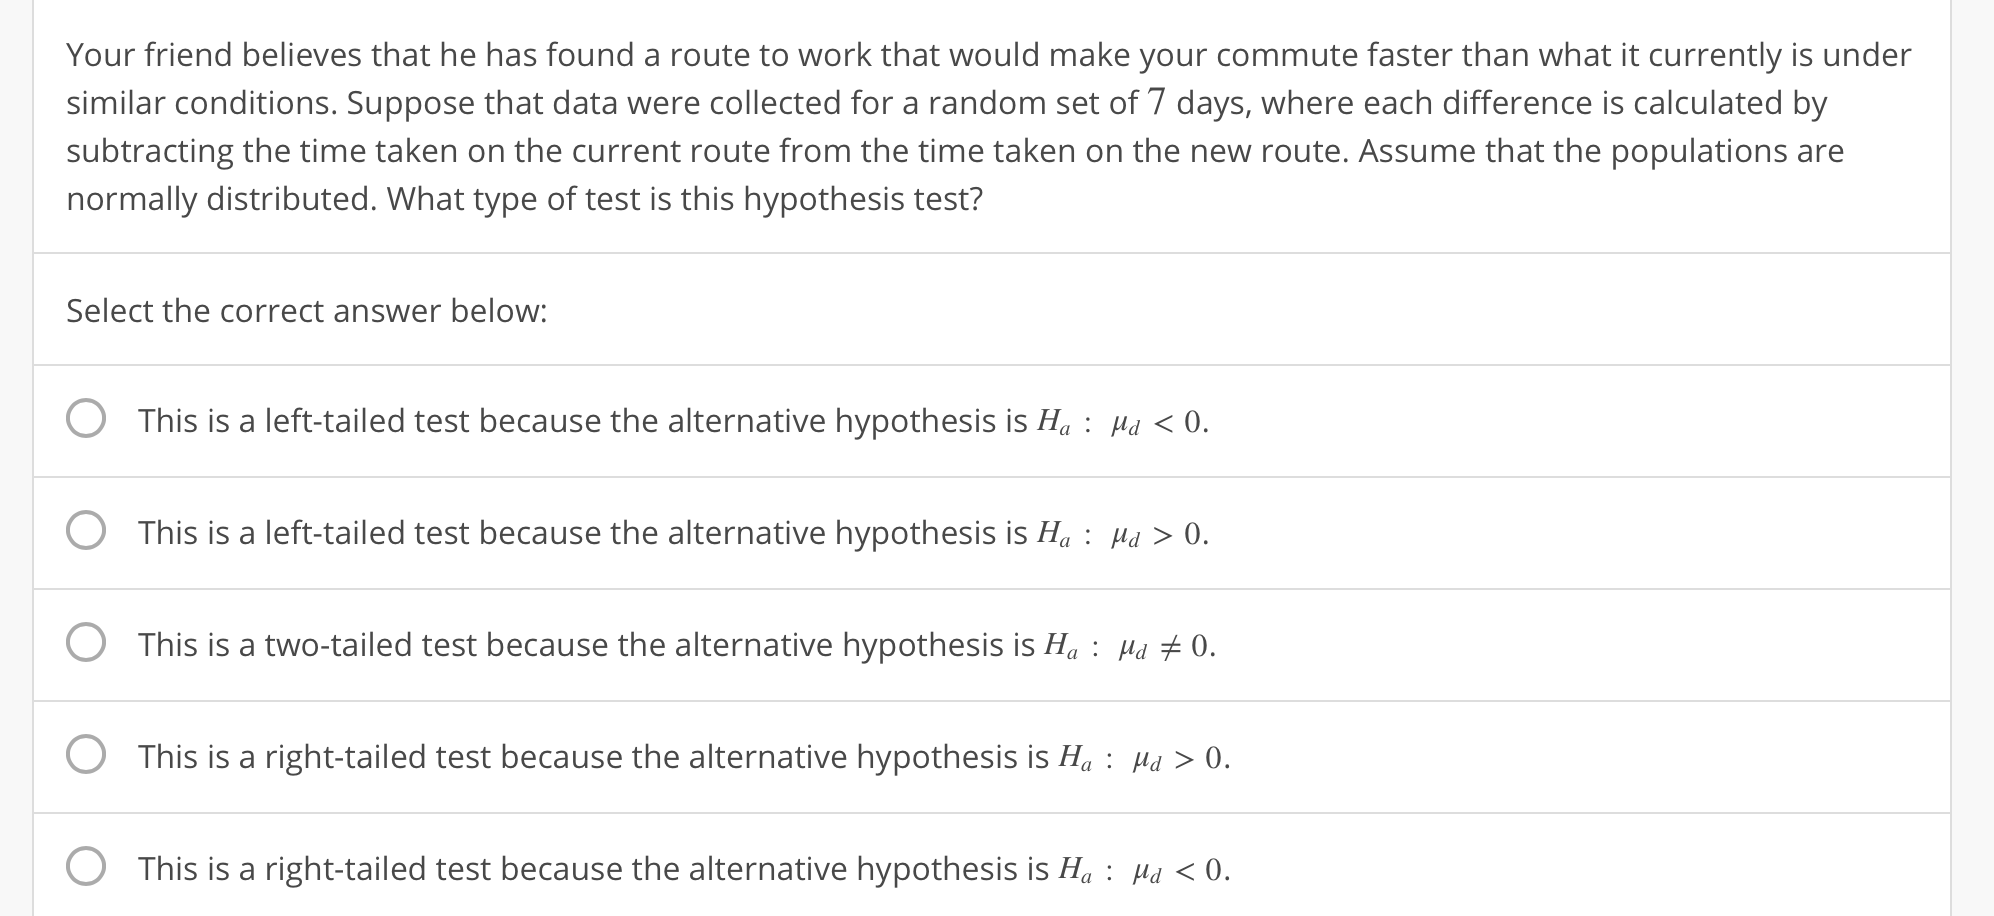 Your friend believes that he has found a route to work that would make your commute faster than what it currently is under
similar conditions. Suppose that data were collected for a random set of 7 days, where each difference is calculated by
subtracting the time taken on the current route from the time taken on the new route. Assume that the populations are
normally distributed. What type of test is this hypothesis test?
Select the correct answer below:
O This is a left-tailed test because the alternative hypothesis is H: H 0
O This is a left-tailed test because the alternative hypothesis is H0
O This is a two-tailed test because the alternative hypothesis is H:Hu 0.
0 This is a right-tailed test because the alternative hypothesis is Њ : d > 0.
O This is a right-tailed test because the alternative hypothesis is H: H 0.
